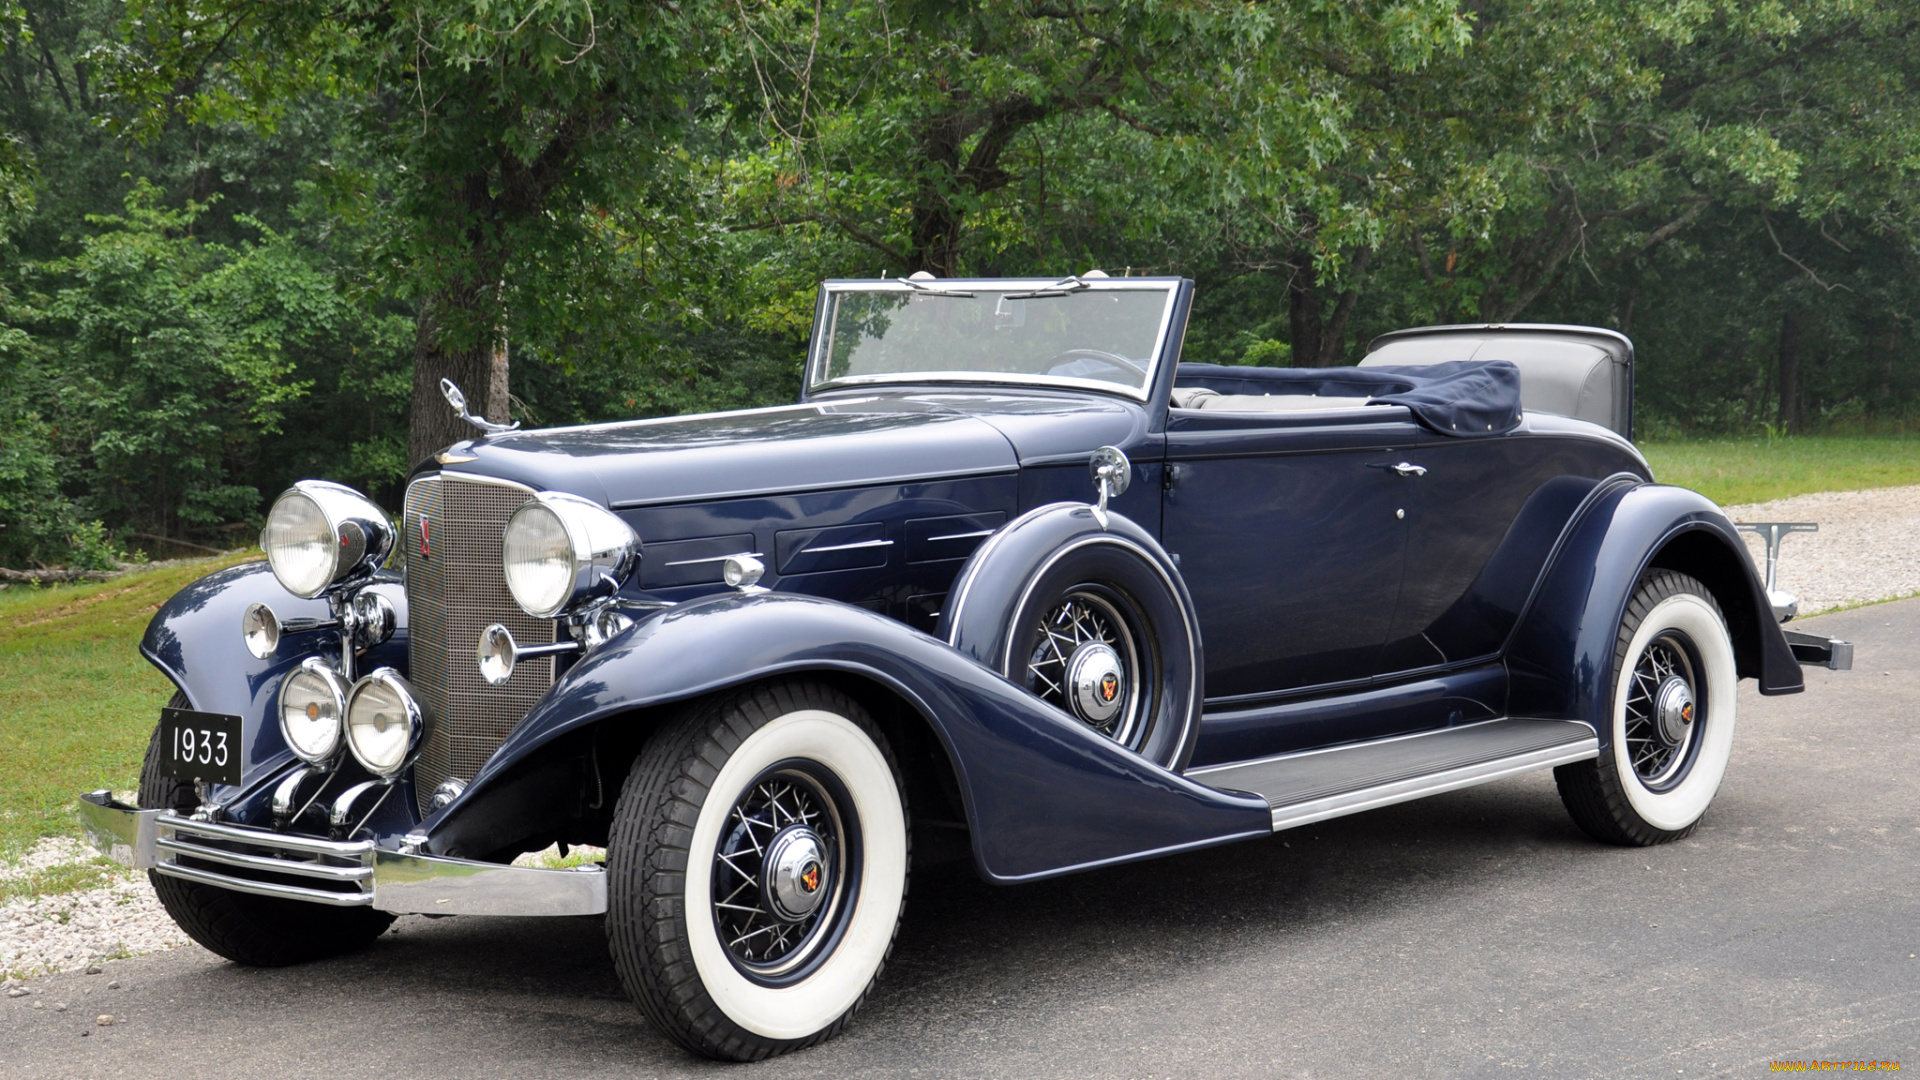 cadillac, v12, 370, c, convertible, coupe, 1933, автомобили, классика, c, 1933, coupe, convertible, 370, v12, cadillac